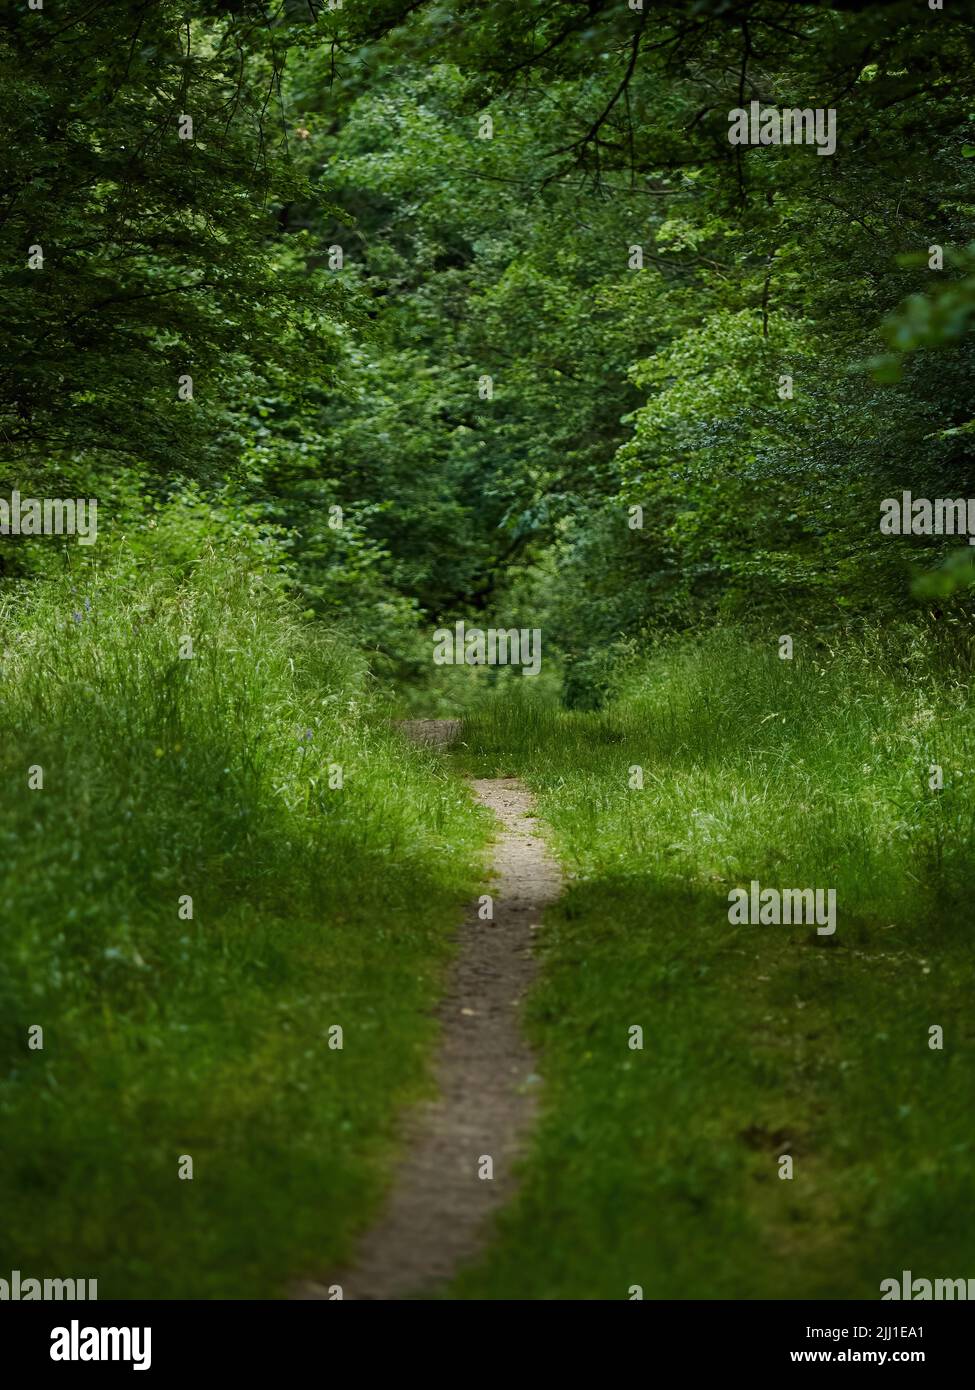 An enticing, winding path in shallow focus, leading off through a patch of sunlight and long grass into the cool greenery of some established woodland. Stock Photo